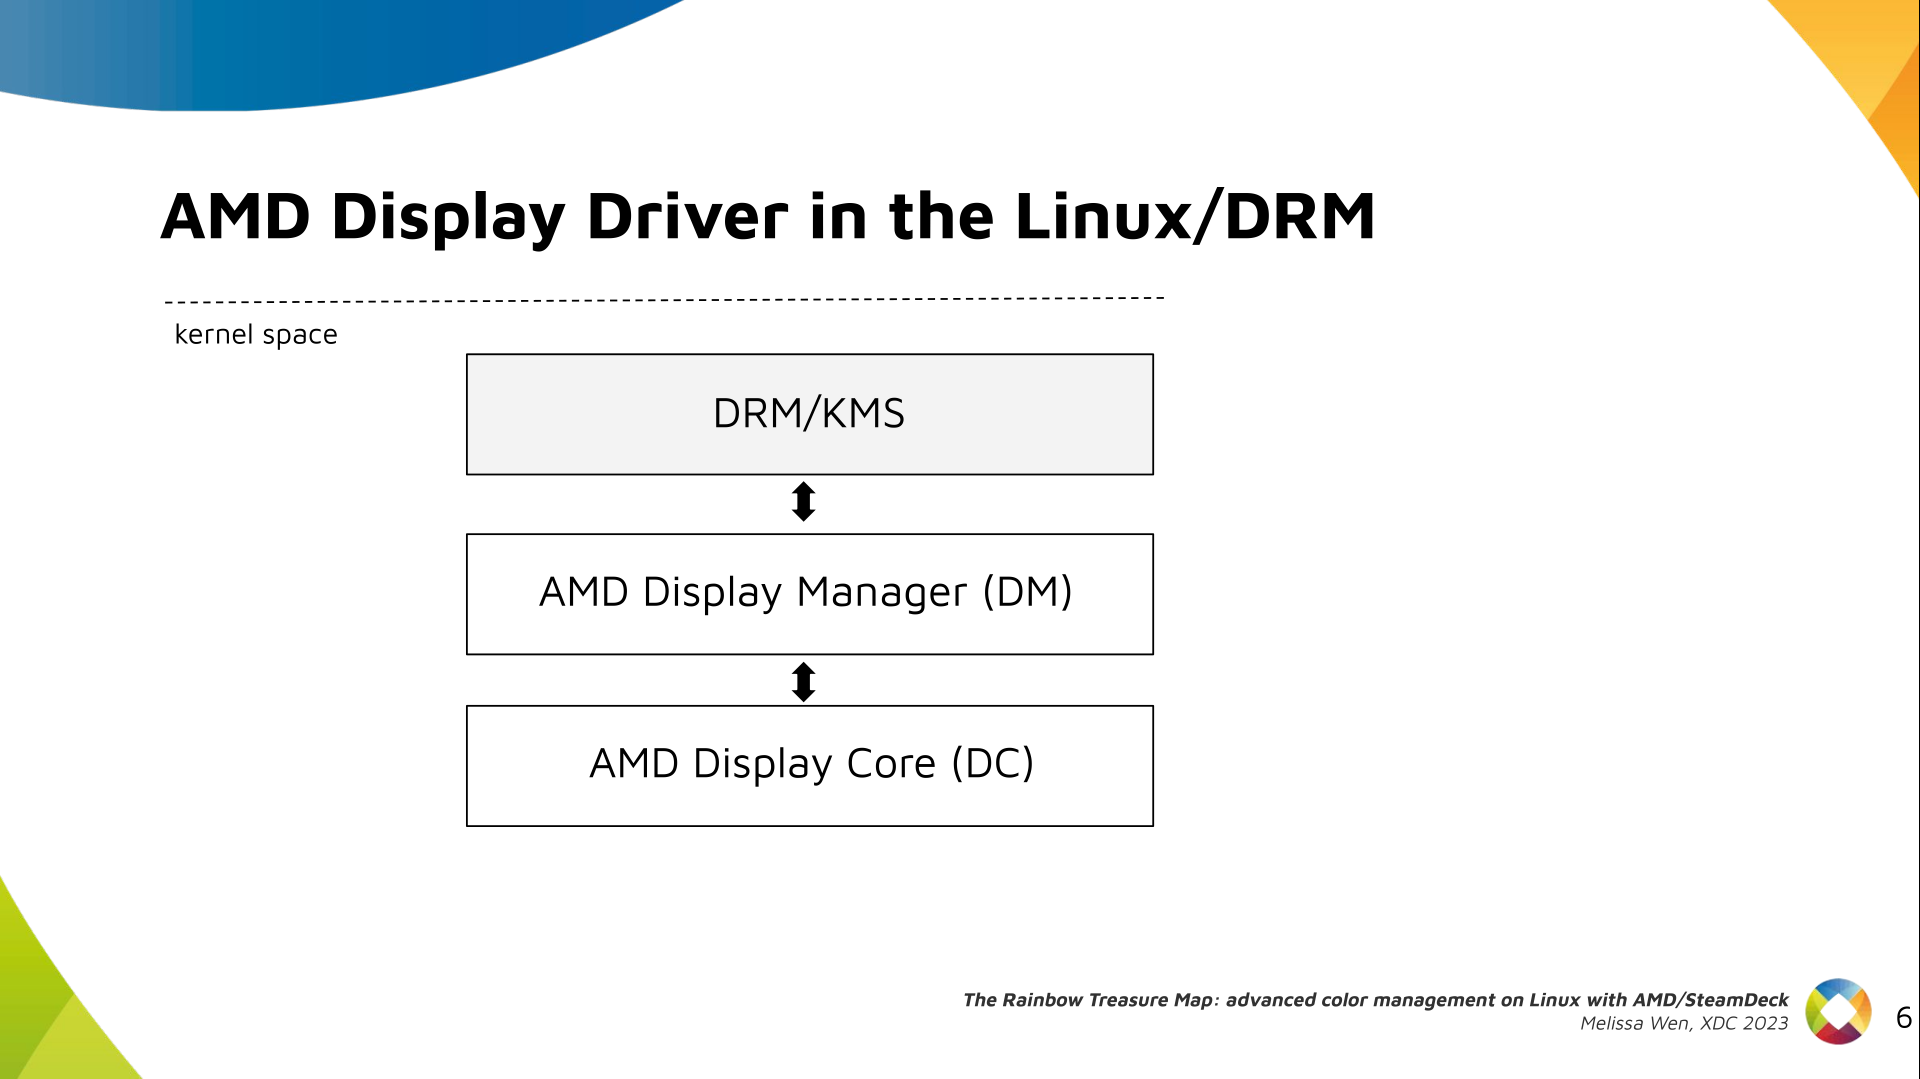 Slide 6: Diagram with the three layers of the AMD display driver on Linux